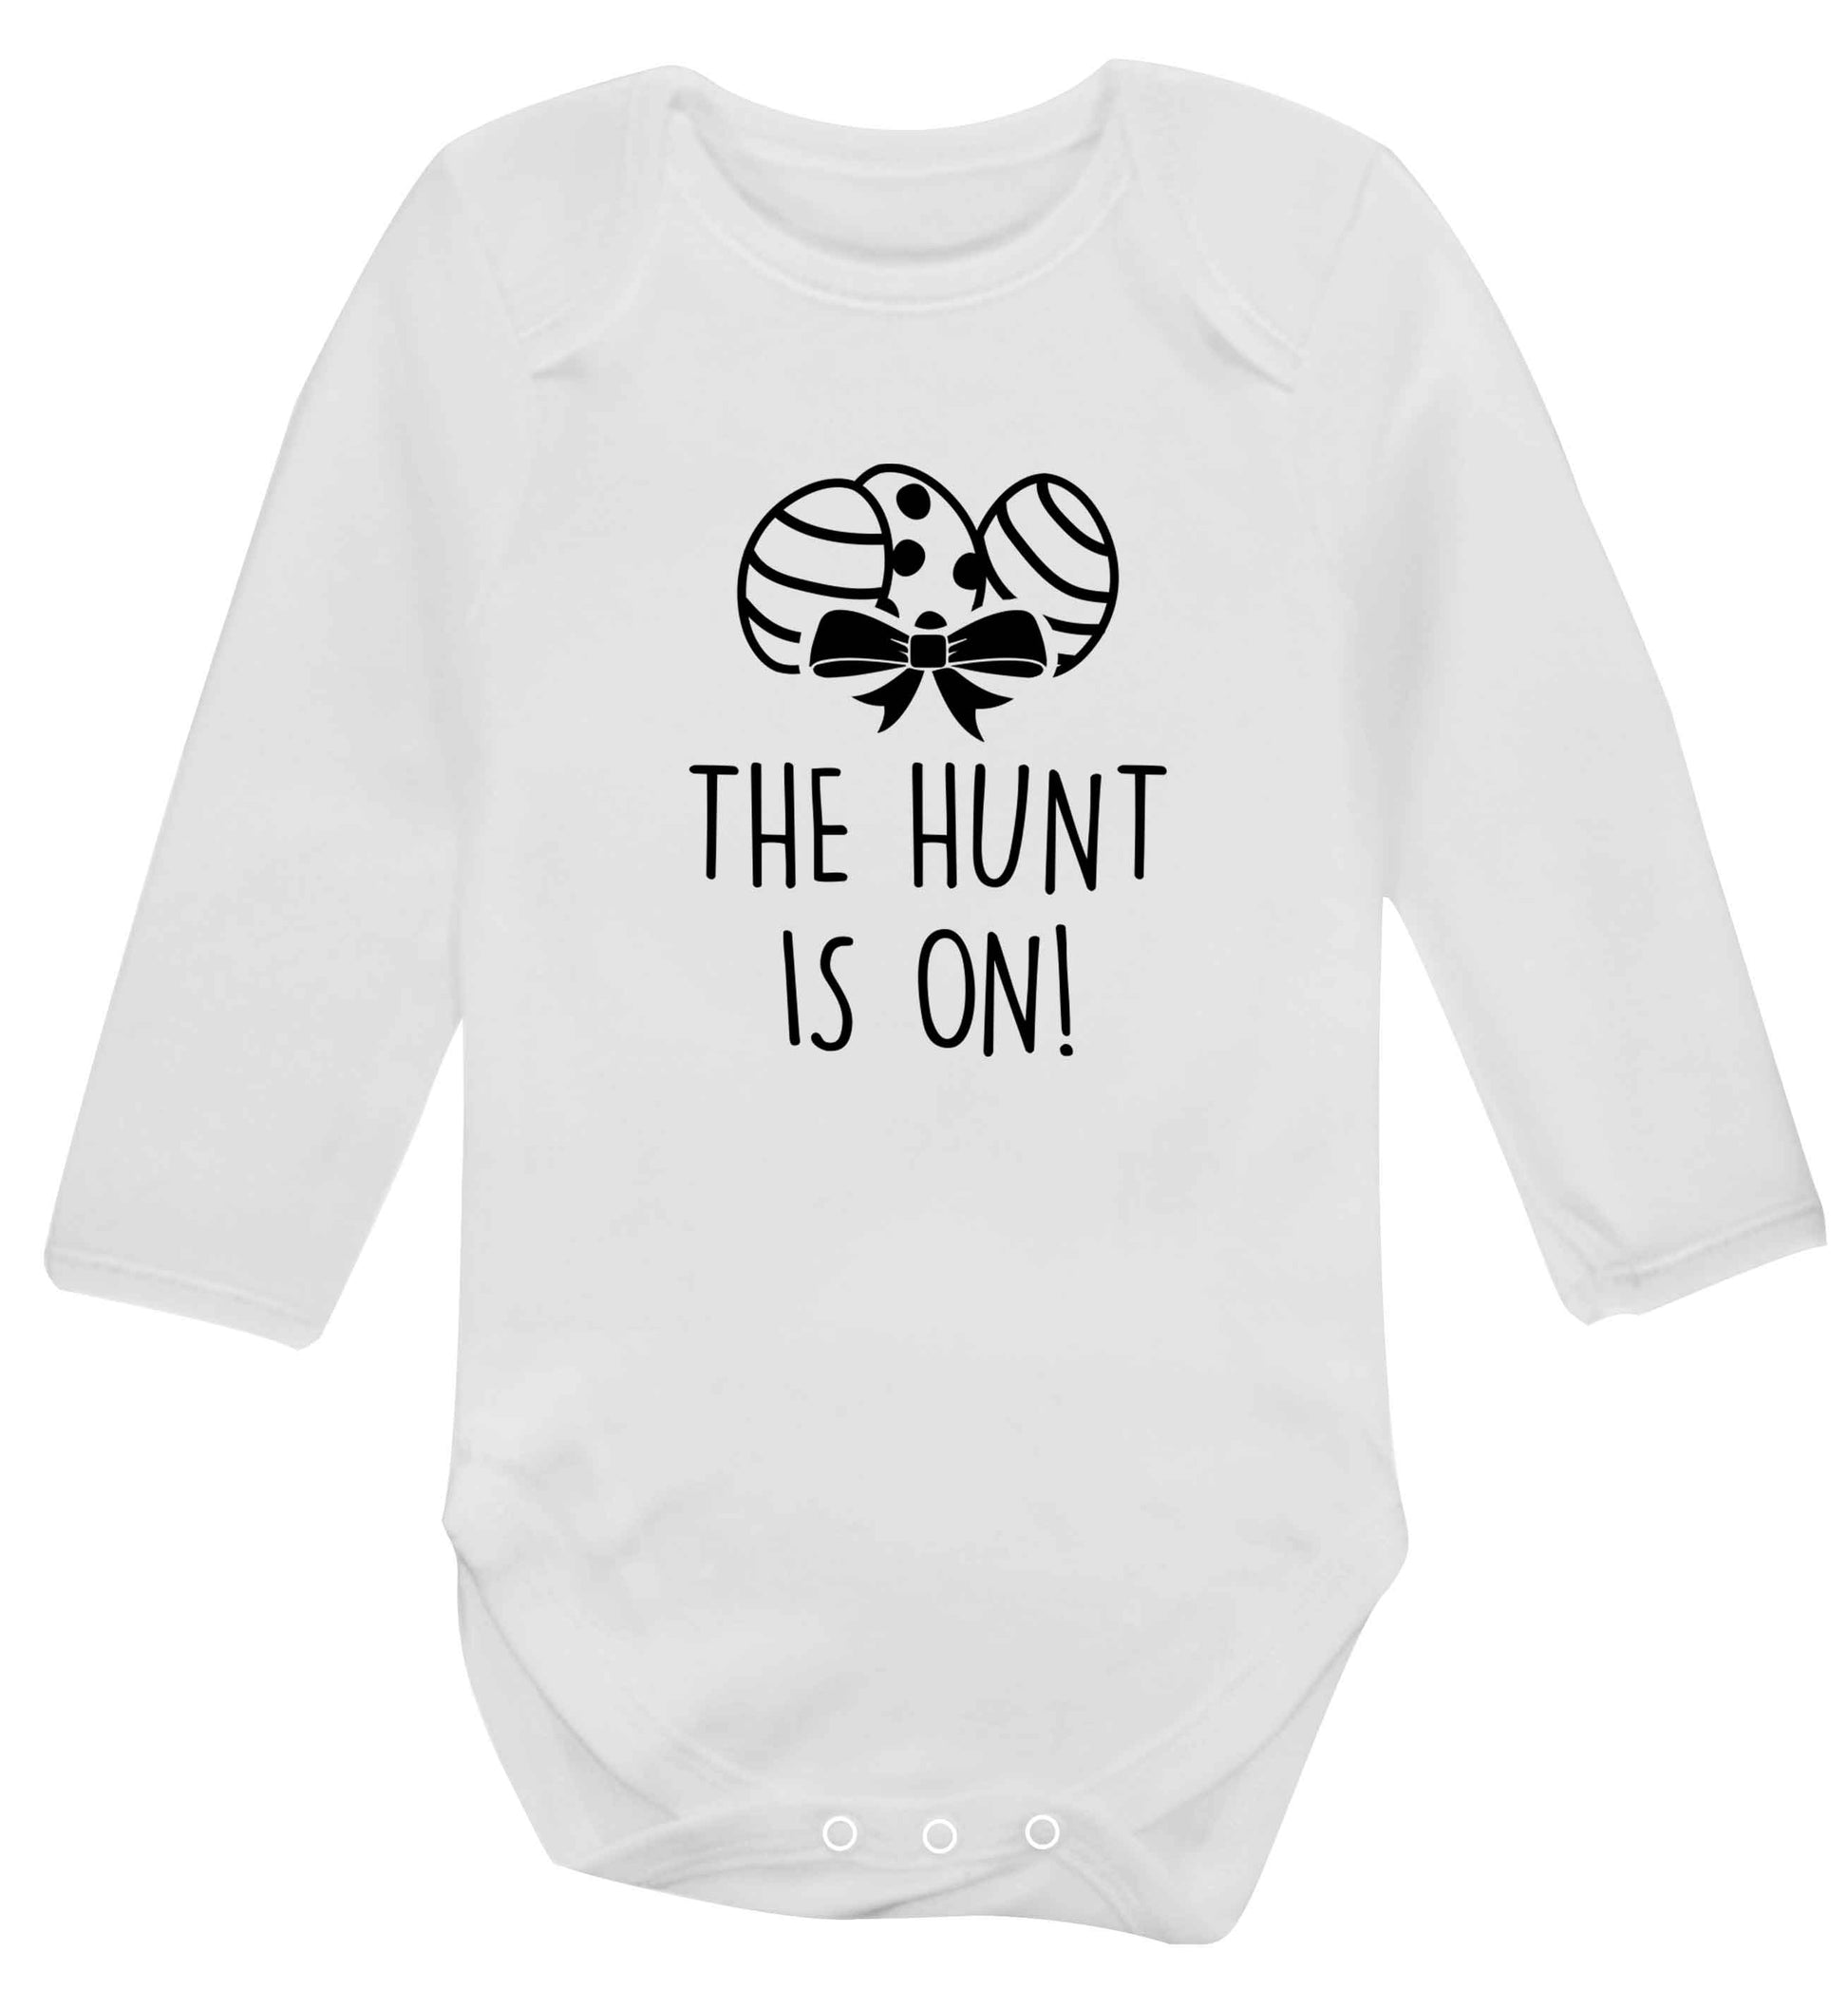 The hunt is on baby vest long sleeved white 6-12 months